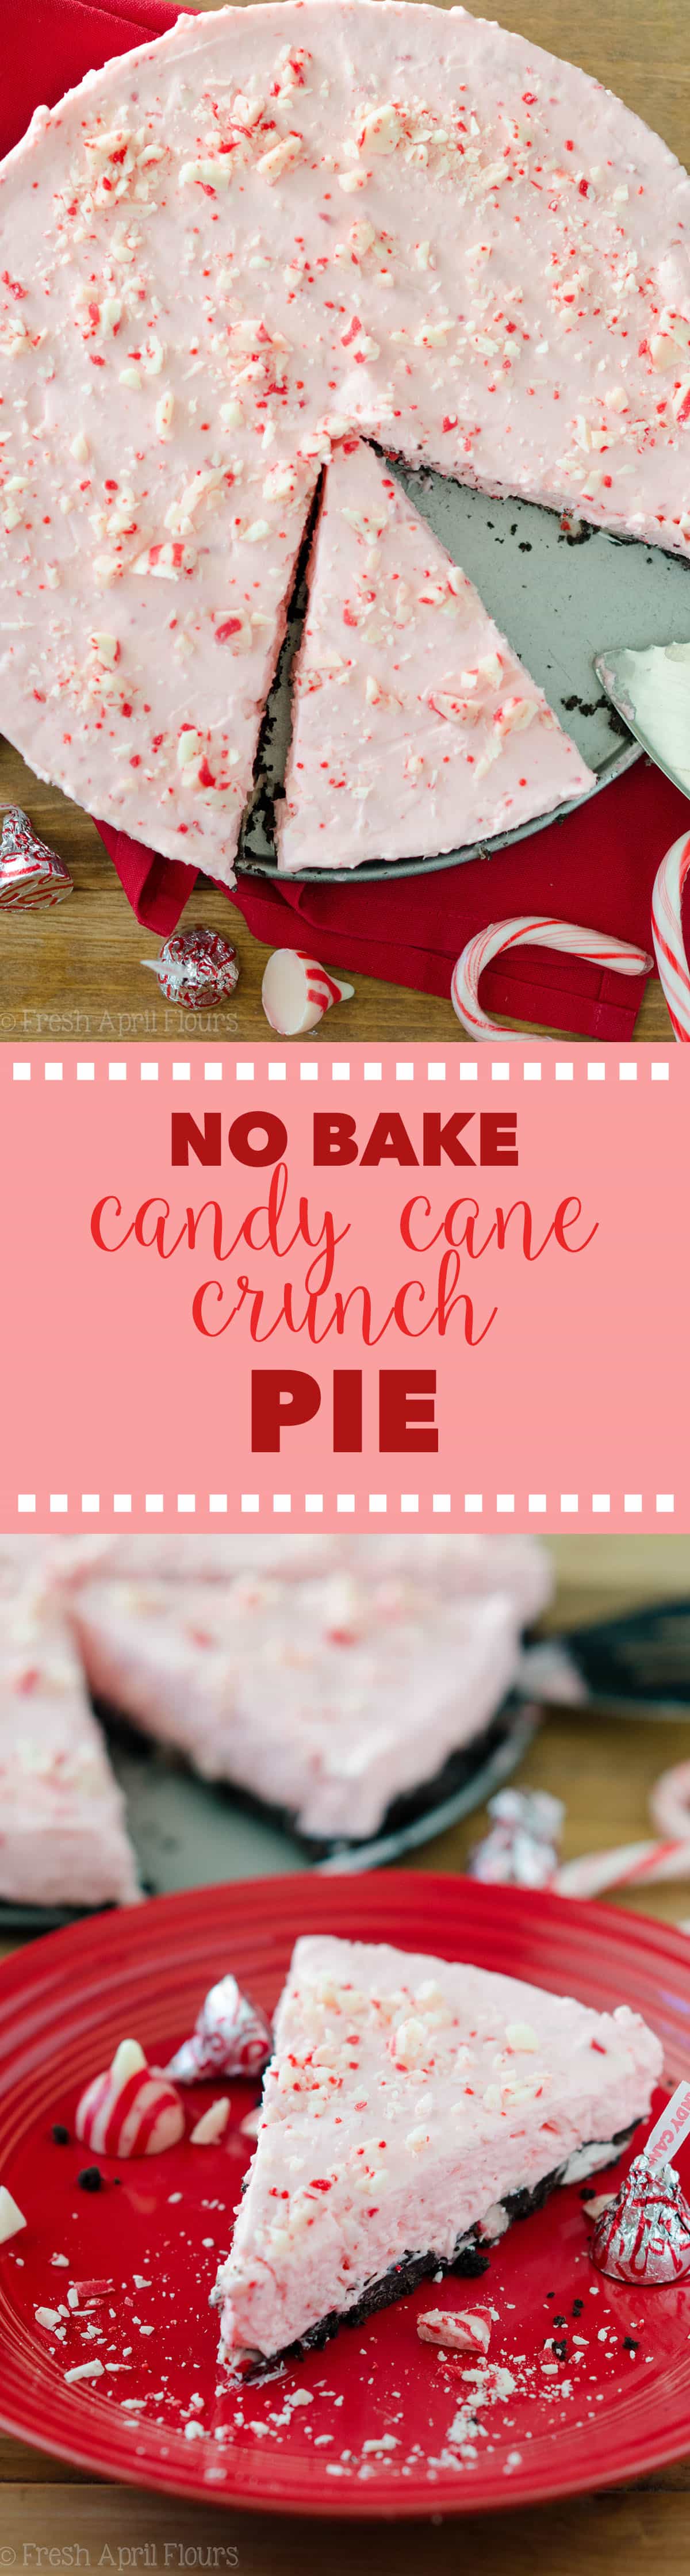 No Bake Candy Cane Crunch Pie: Creamy, minty pie studded with chopped Candy Cane Kisses all on top of a crunchy Oreo cookie crust. via @frshaprilflours